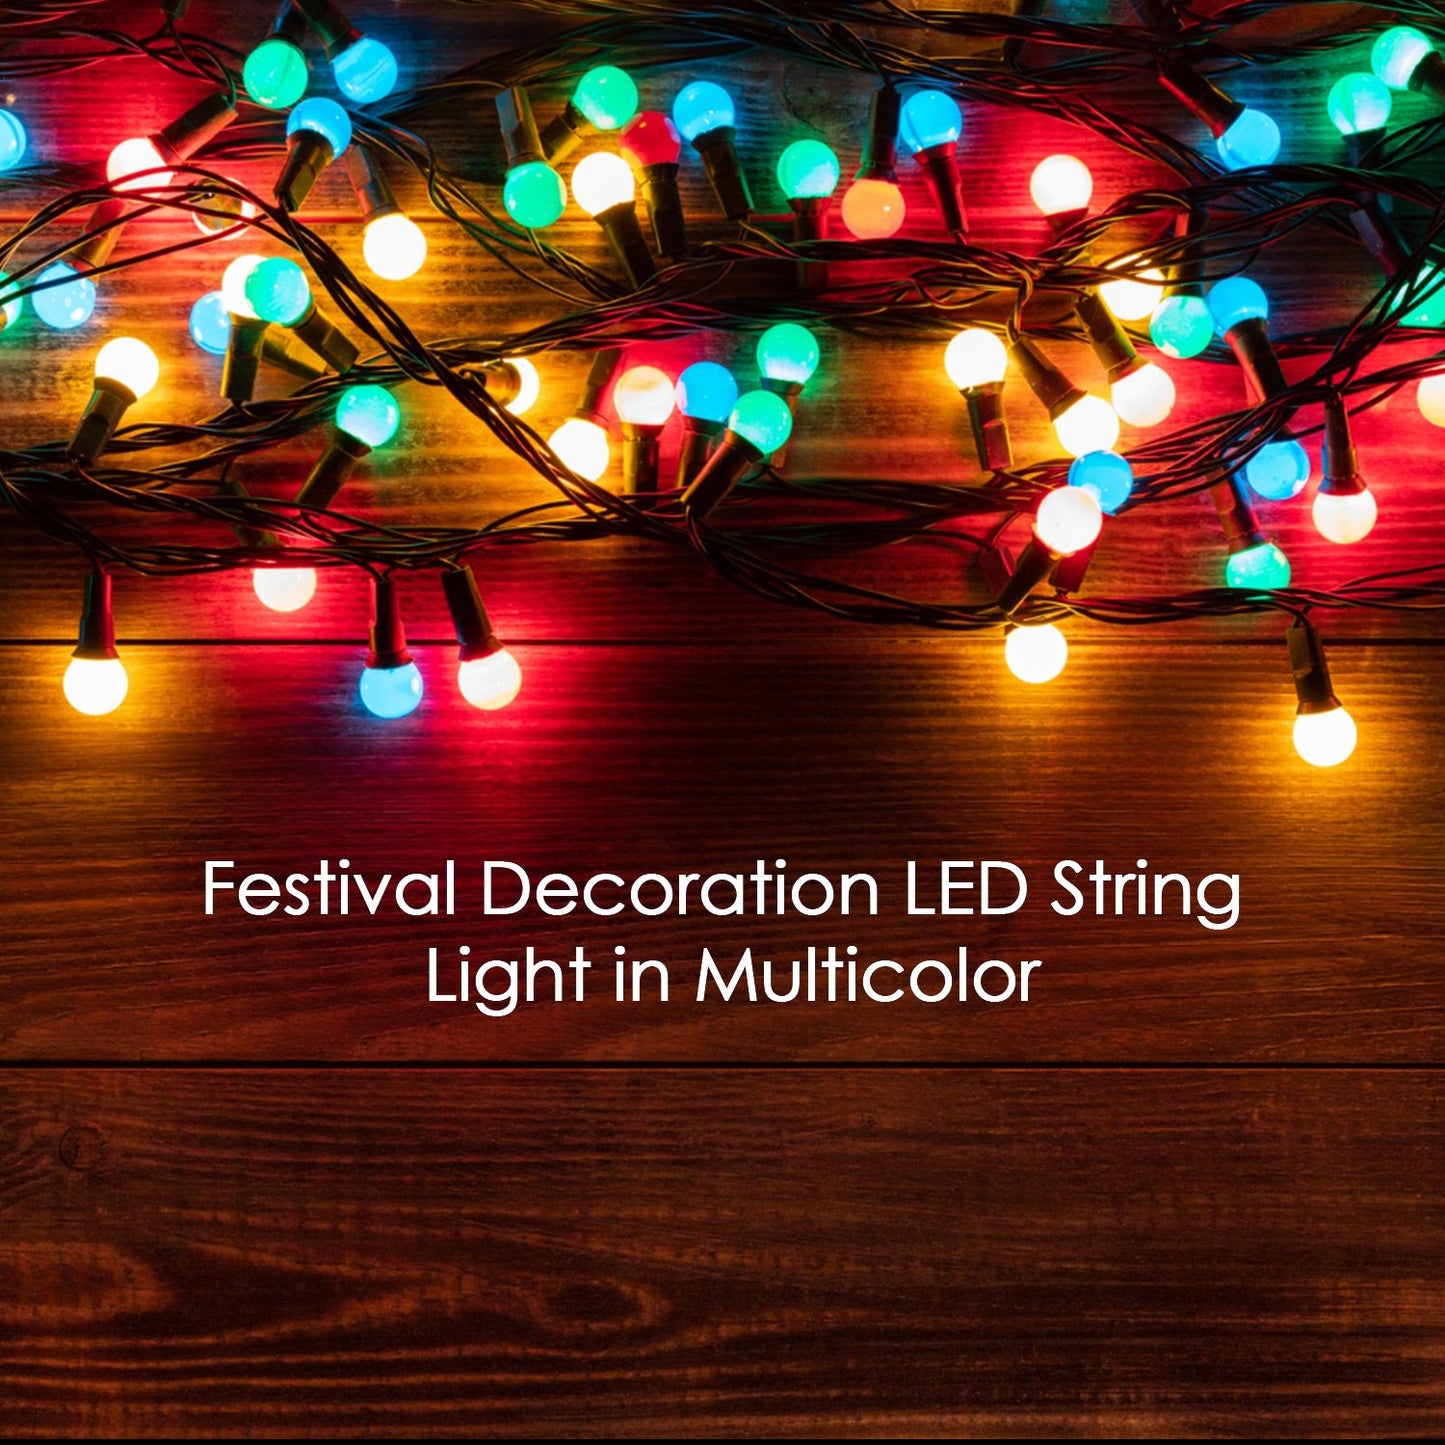 8346 3Mtr Home Decoration Diwali & Wedding LED Christmas String Light Indoor and Outdoor Light ,Festival Decoration Led String Light, Multi-Color Light 1.4MM (15L 3 Mtr)